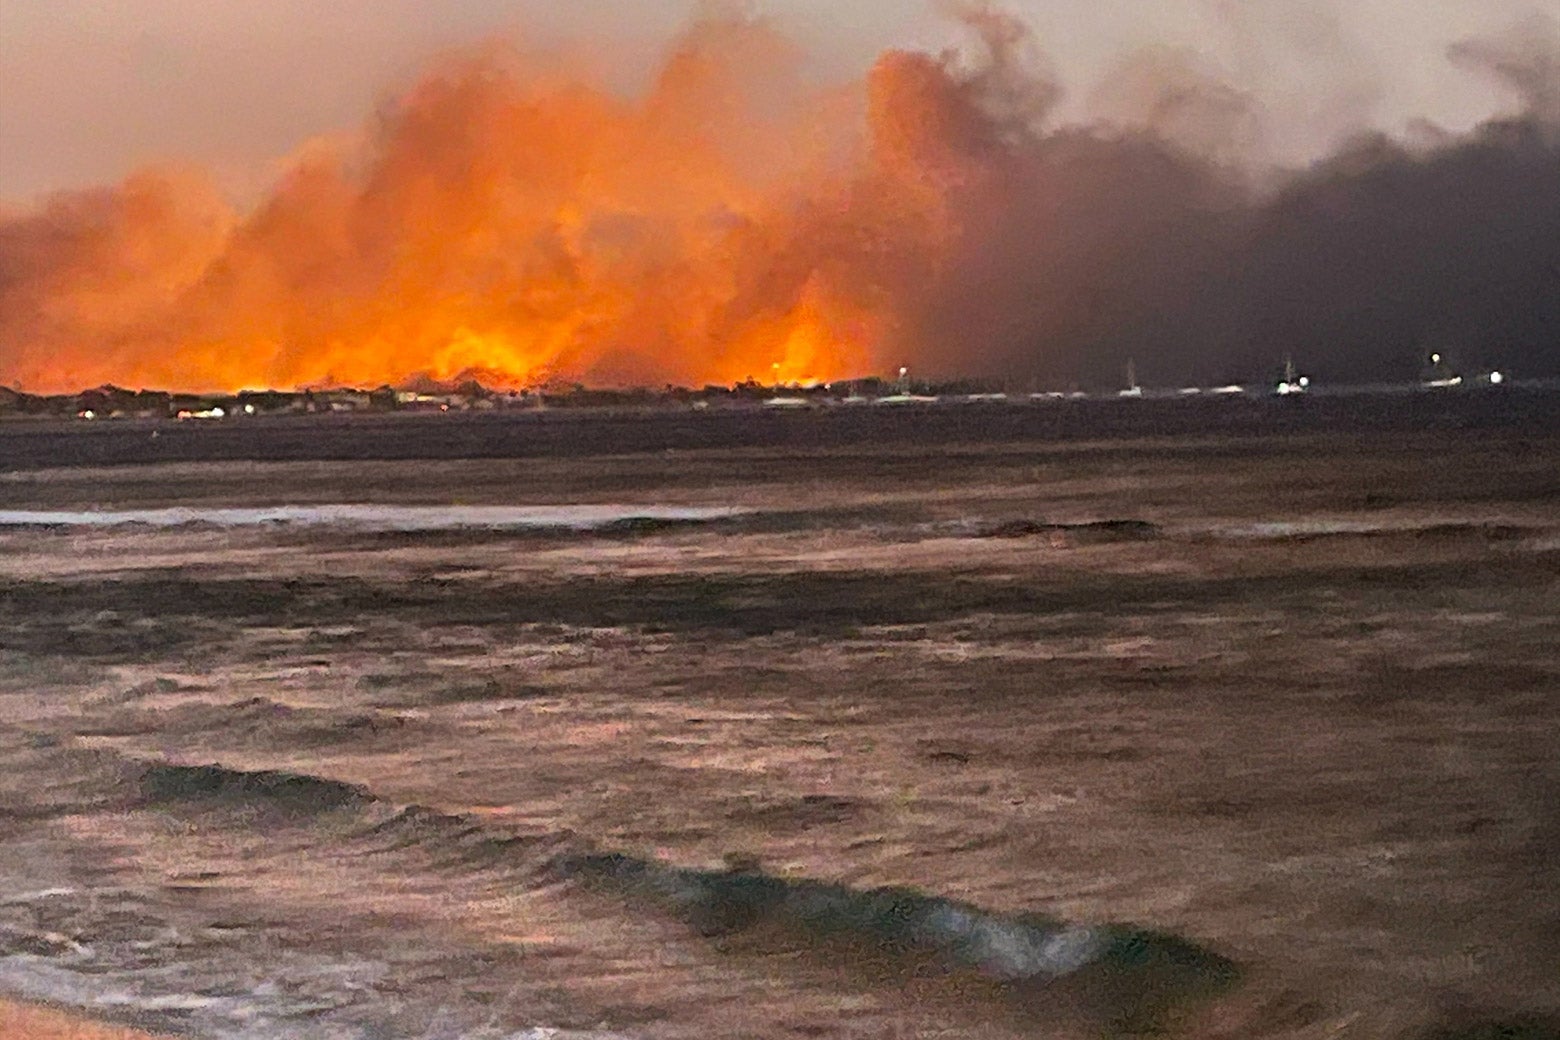 A view of a burning wildfire from a body of water.